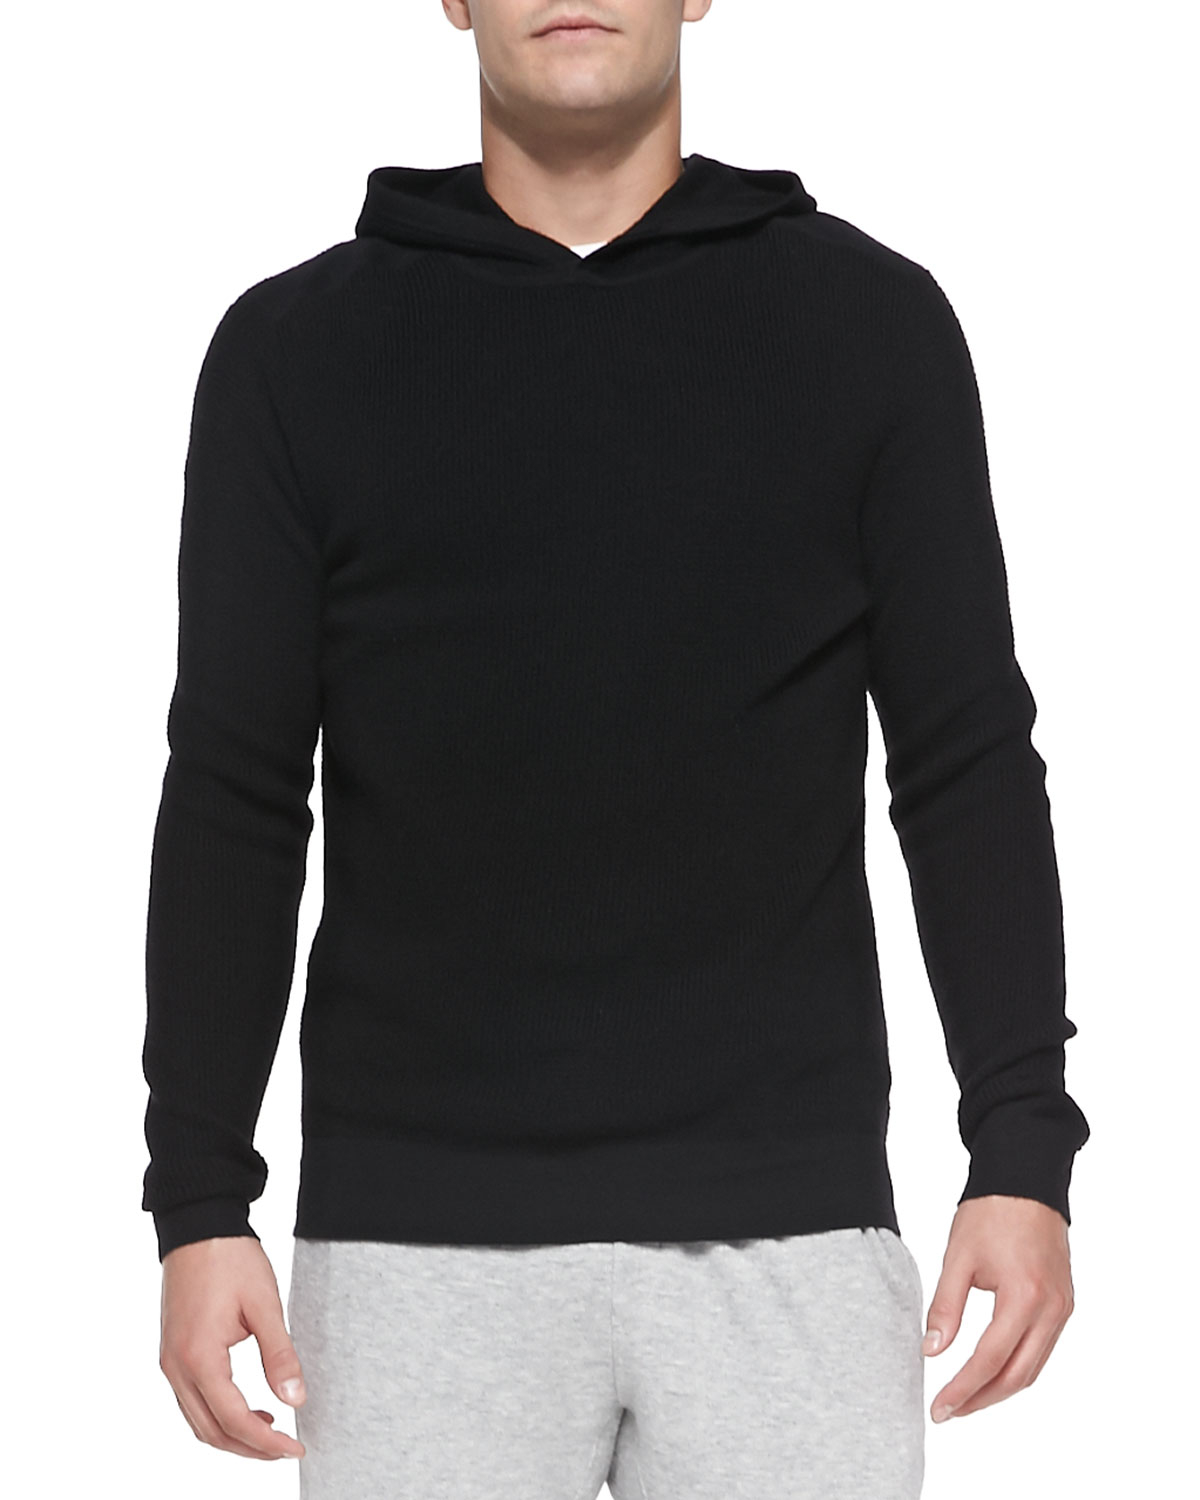 Lyst - Theory Dami Hooded Pullover Sweatshirt in Black for Men